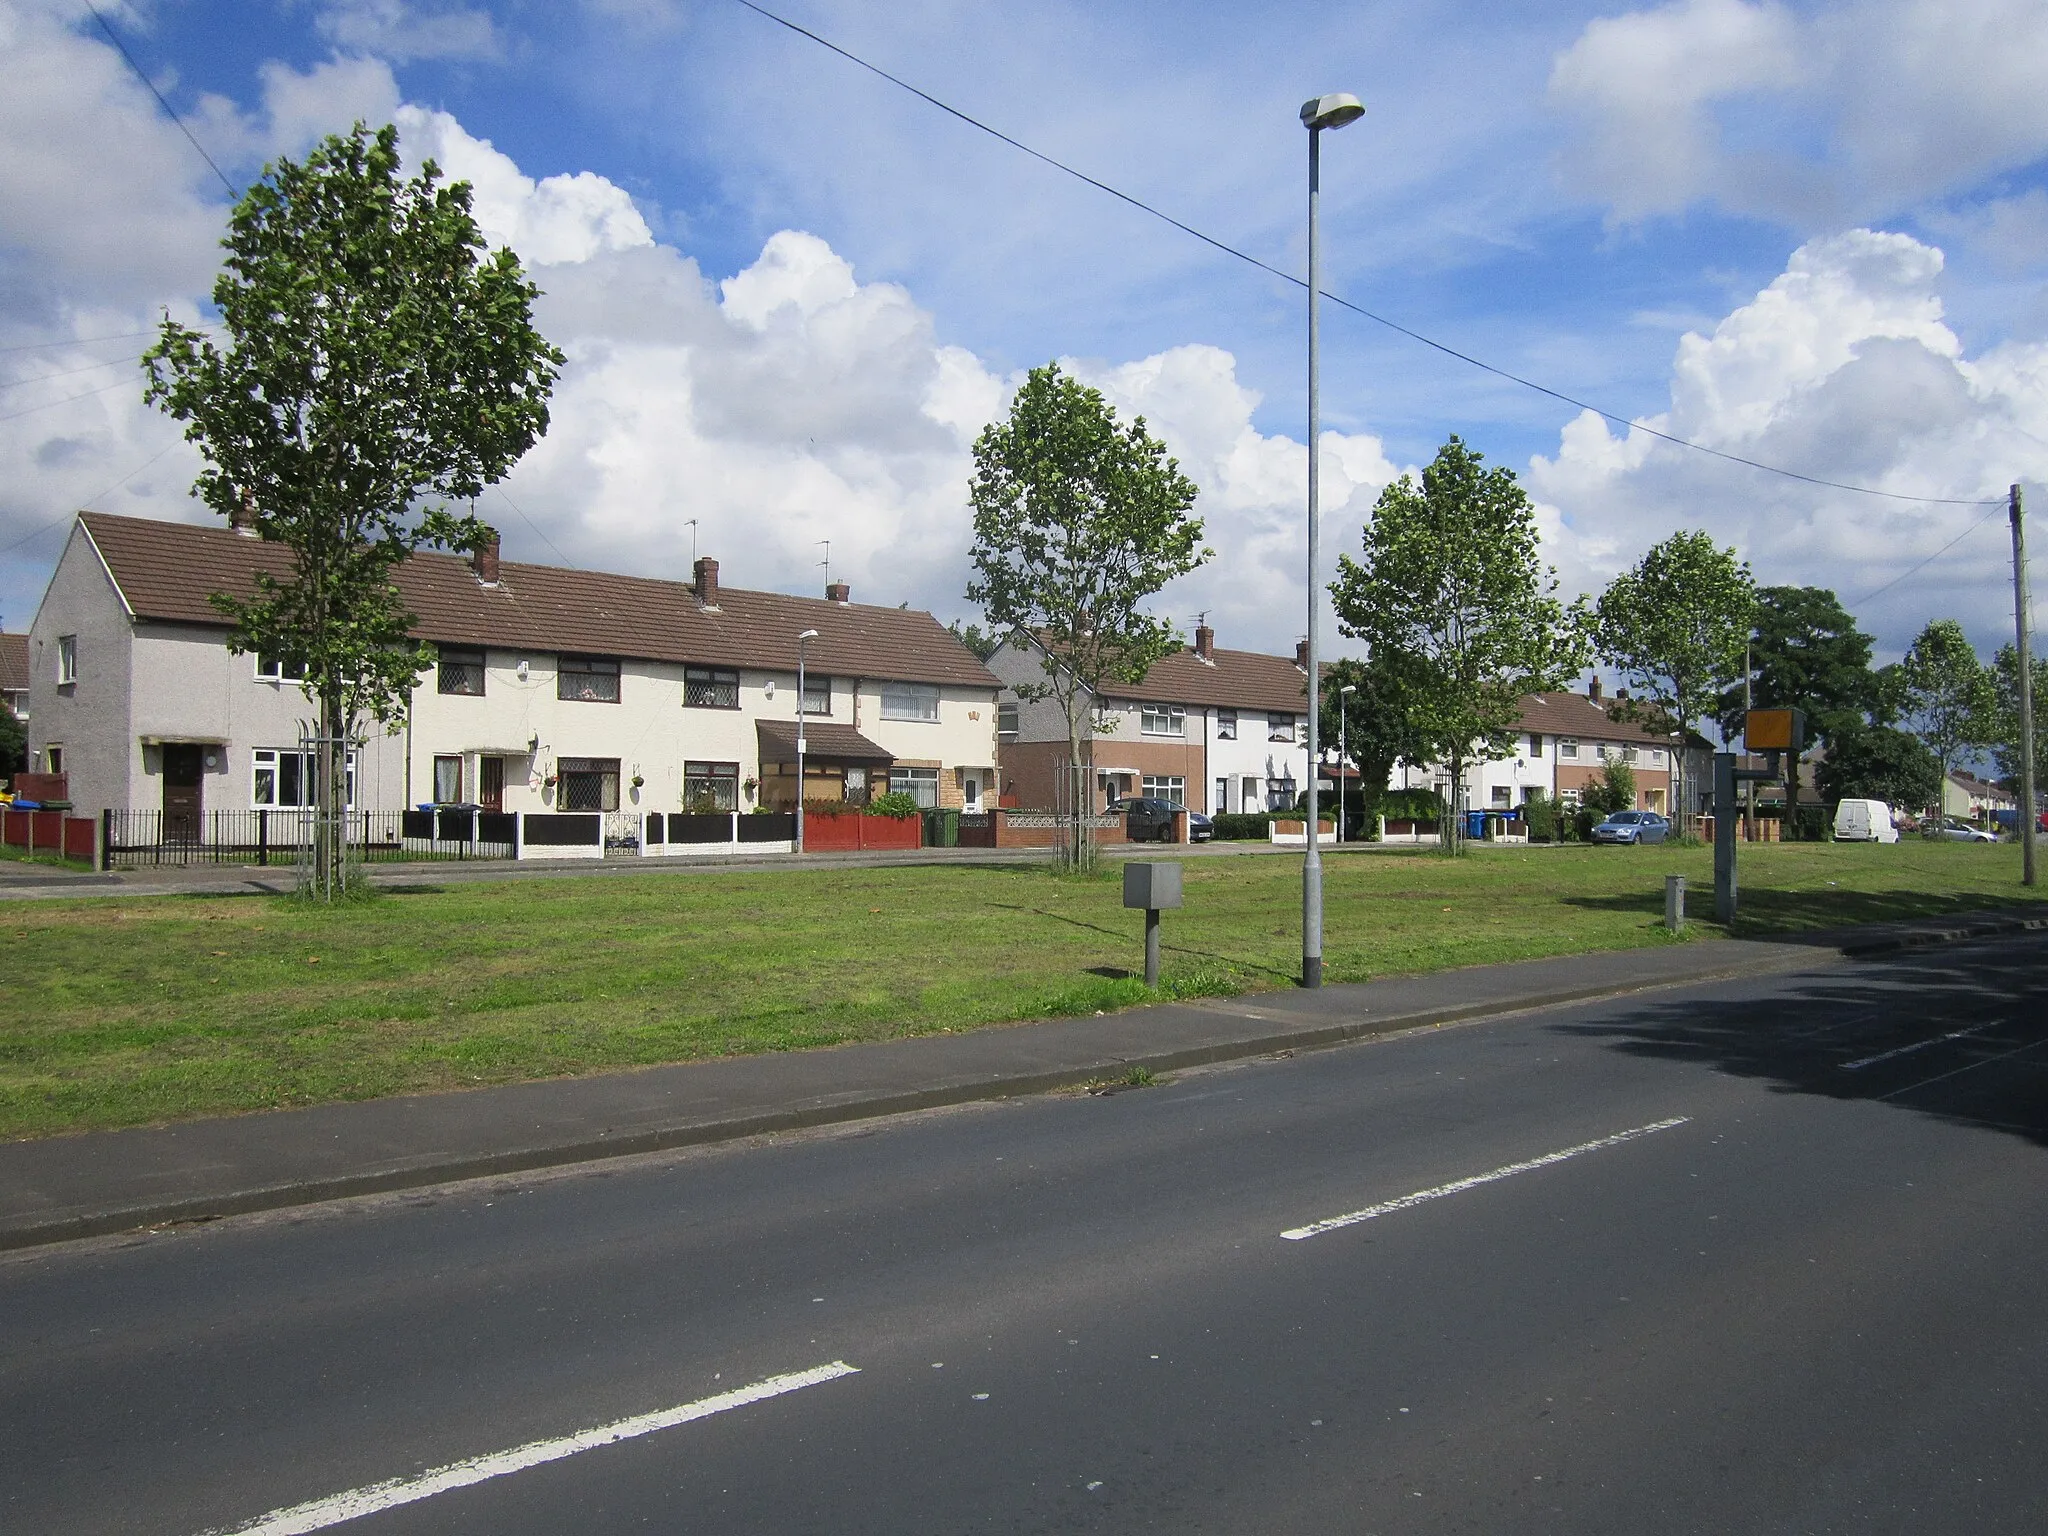 Photo showing: Ditchfield Road, Ditton, Widnes, Cheshire, England.